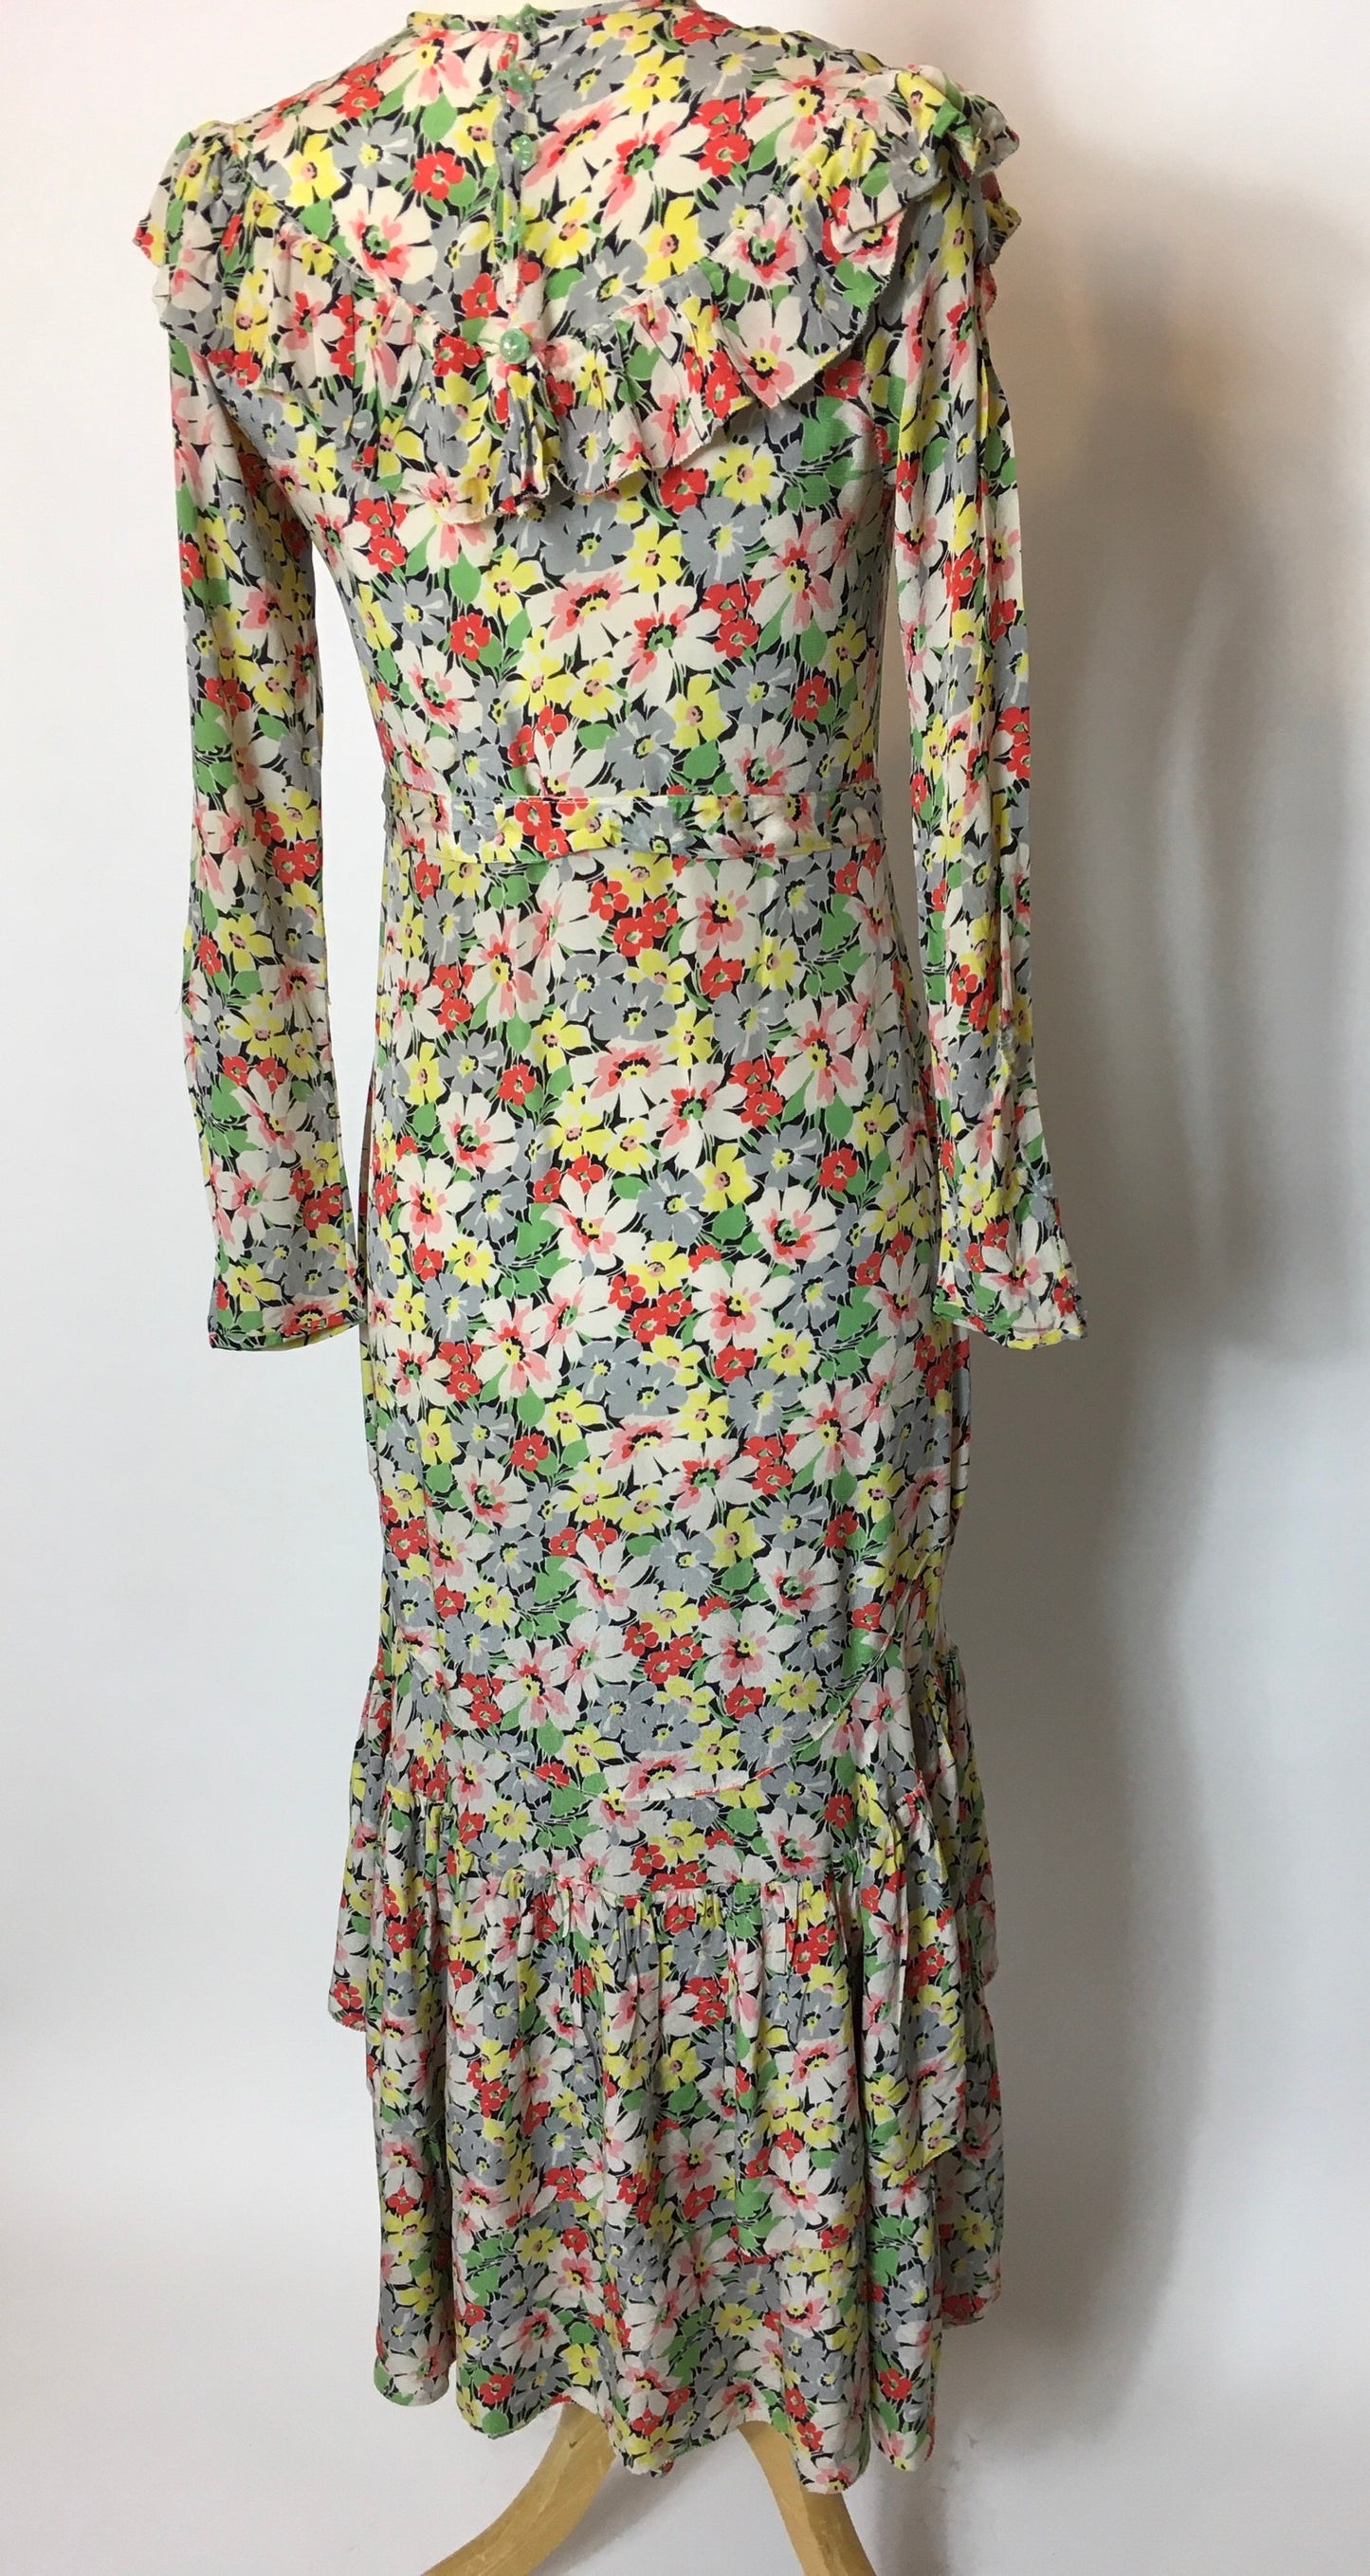 Original 1930s Darling Day Dress In English Meadow Print Selling As Is - Festival of Vintage Fashion Show Exclusive